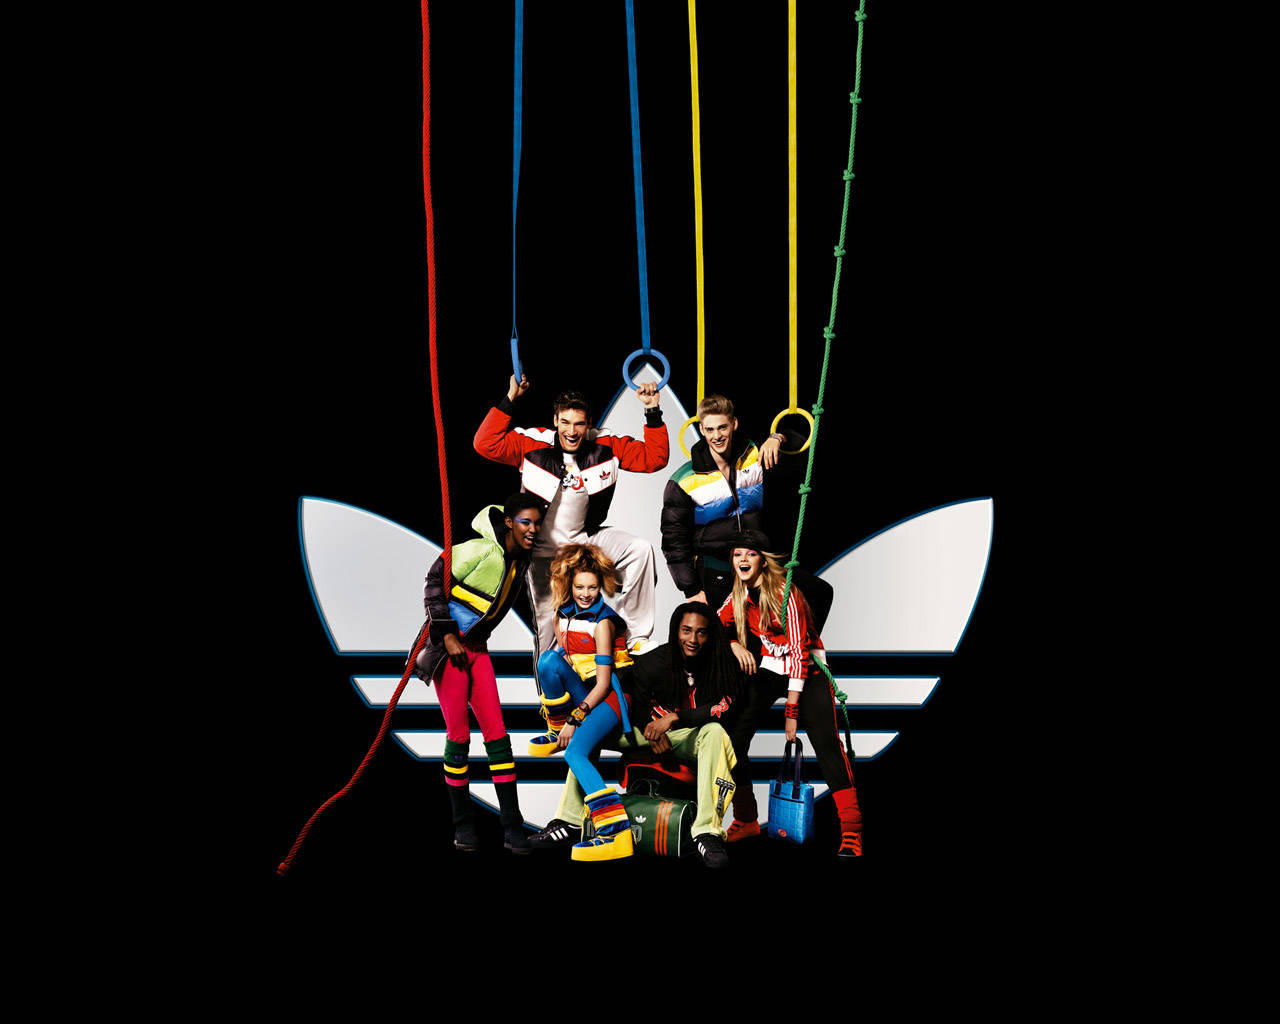 Represent the future with Adidas Wallpaper